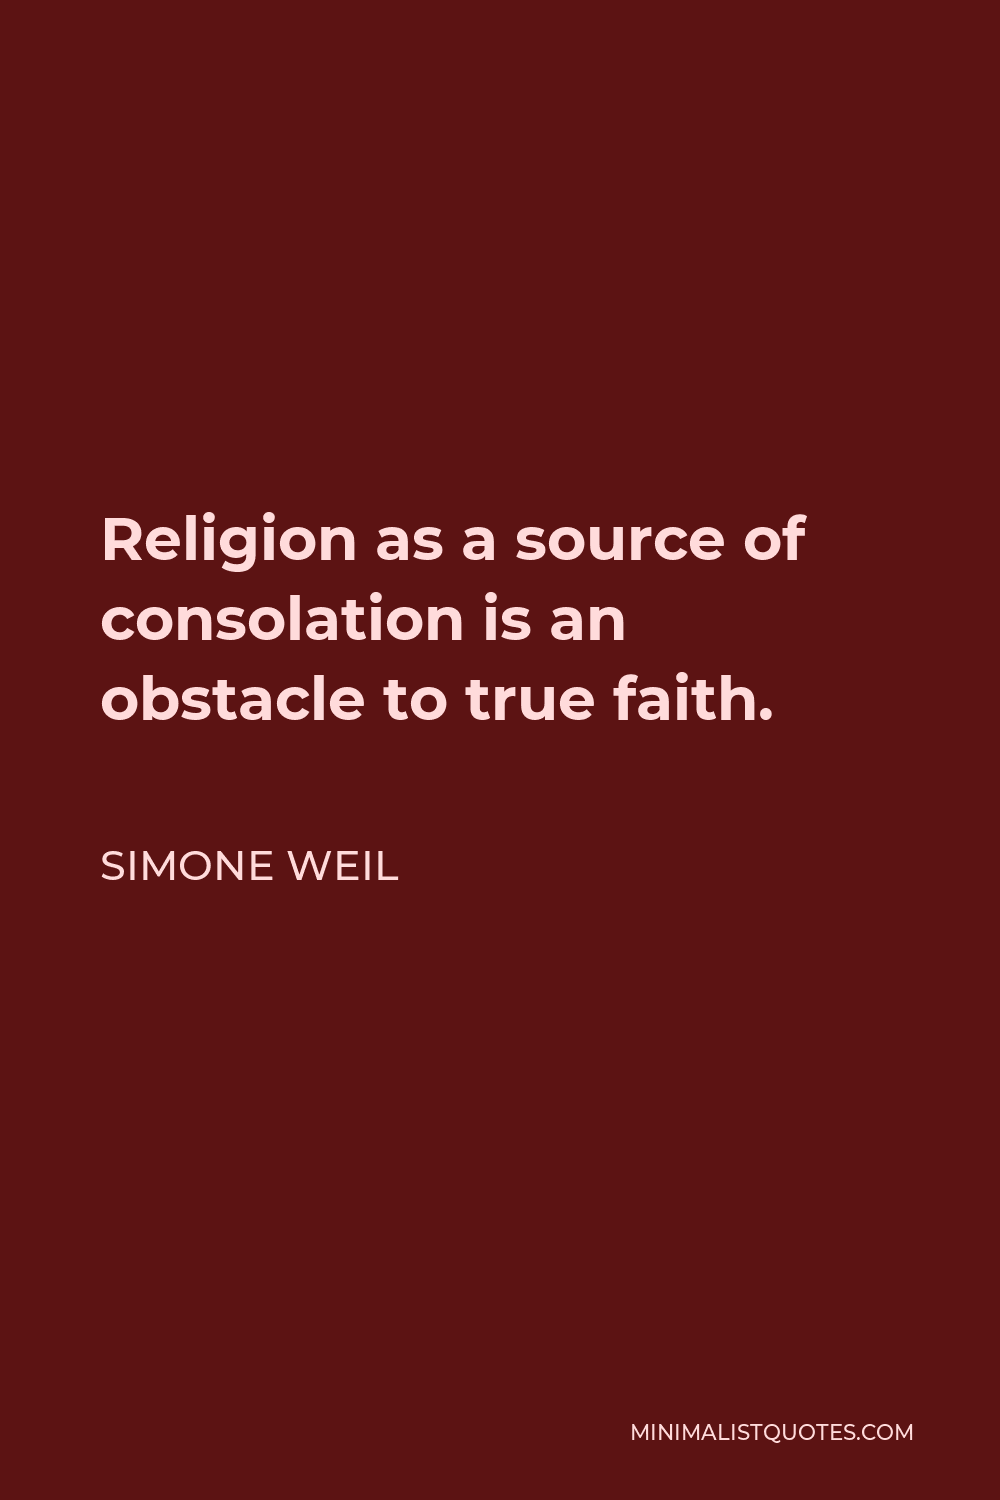 Simone Weil Quote - Religion as a source of consolation is an obstacle to true faith.